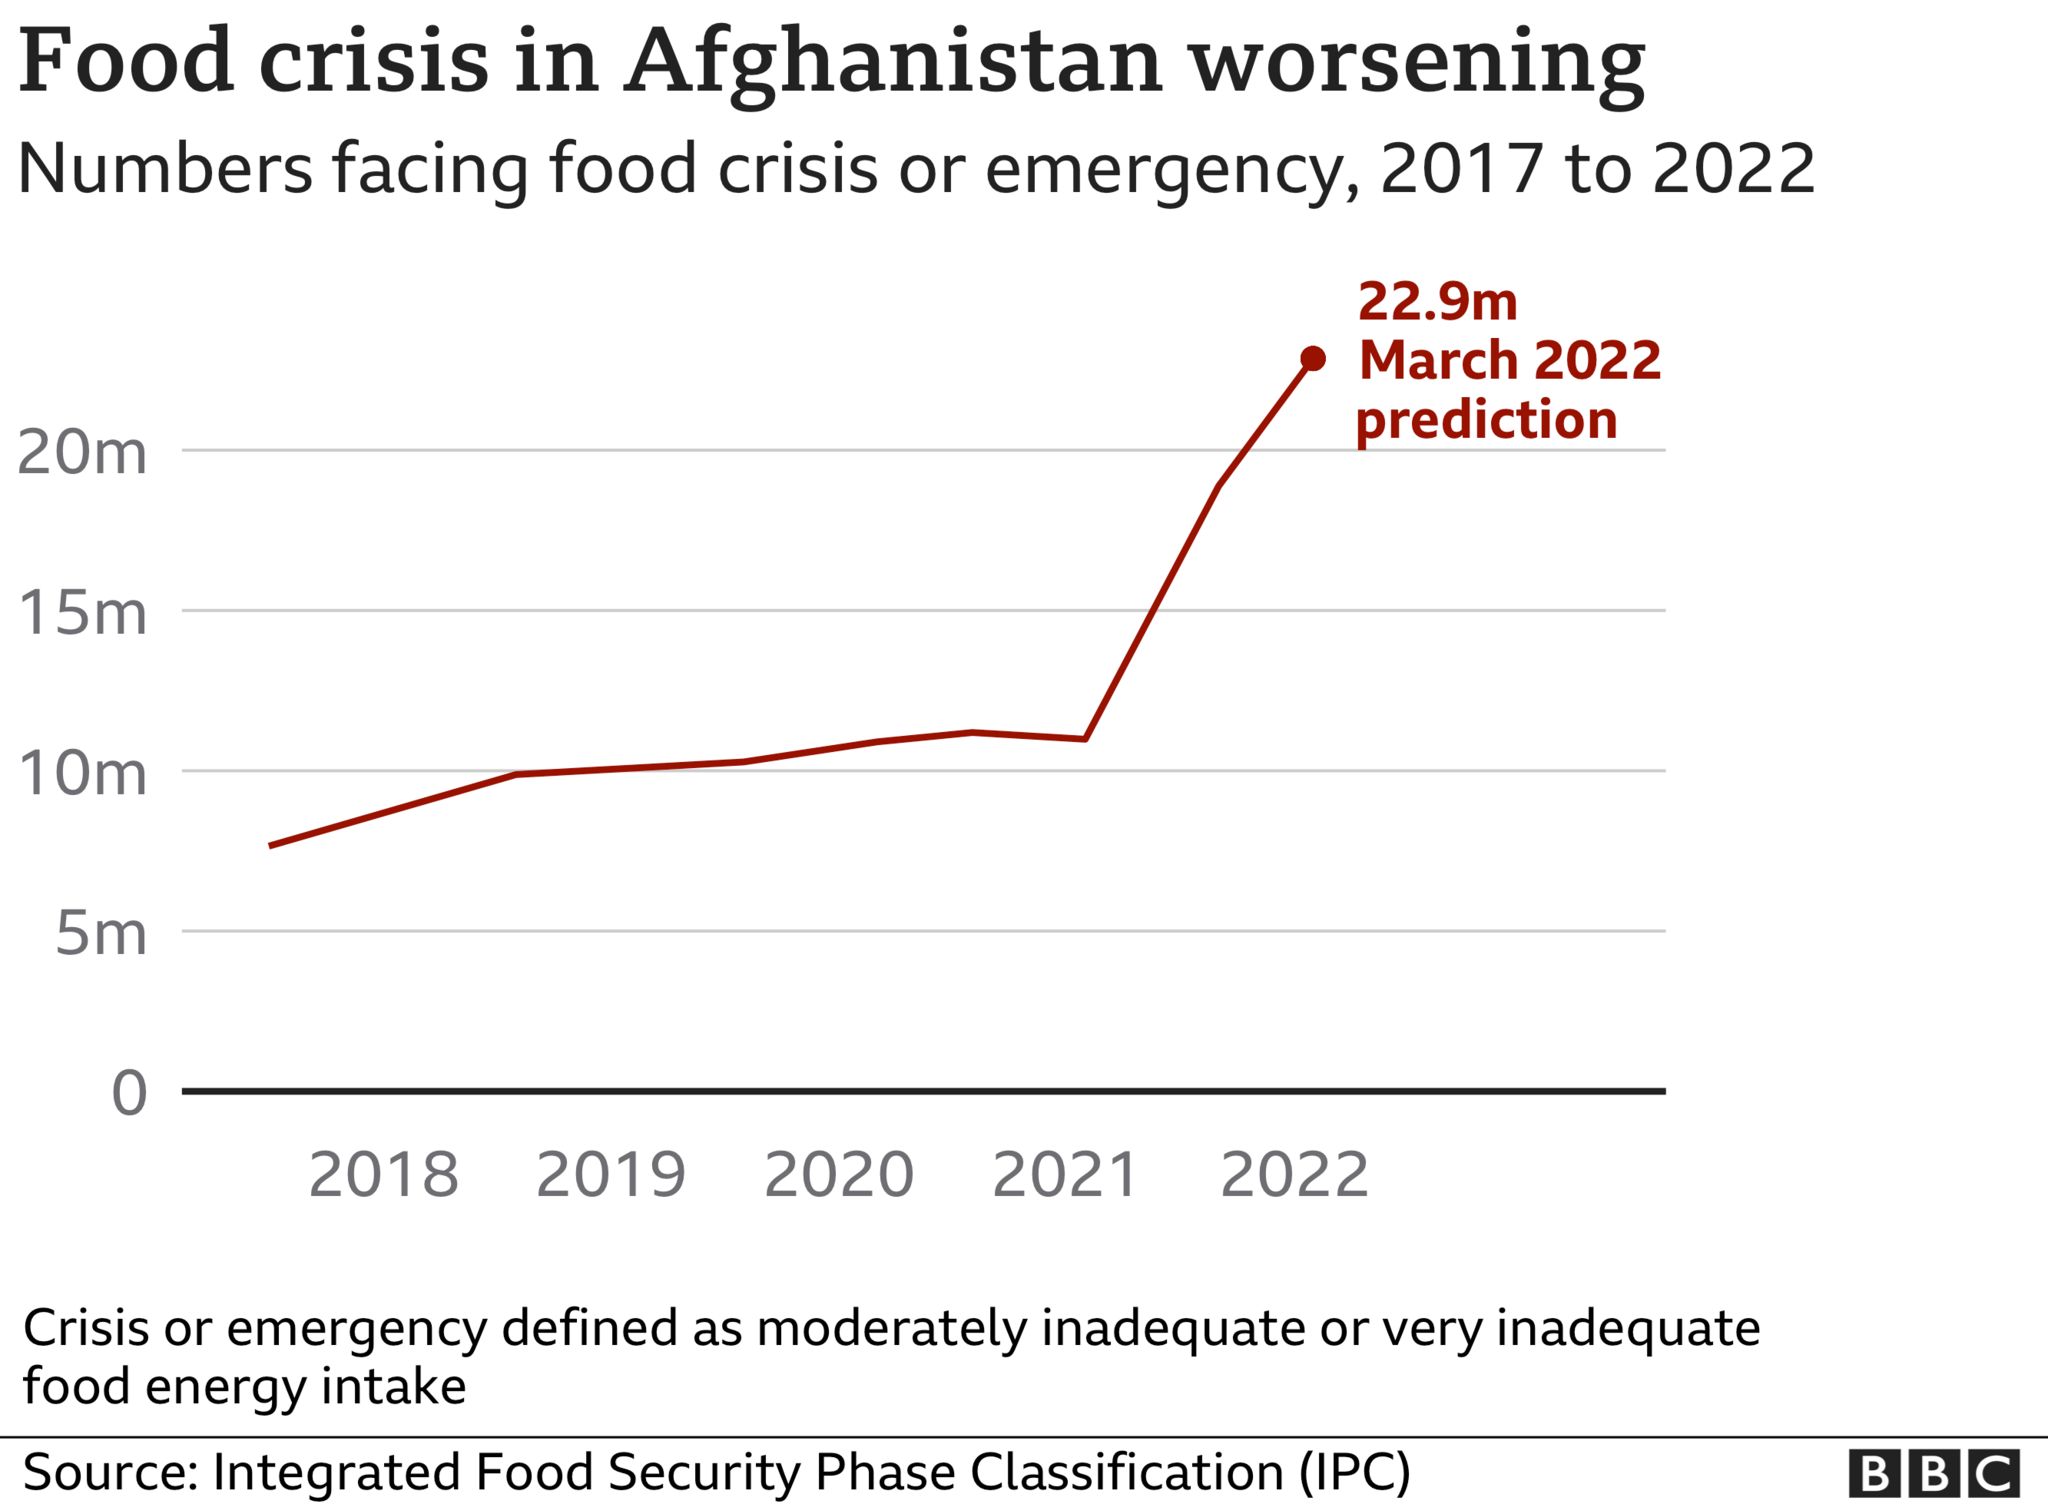 A graph showing numbers needing food aid in Afghanistan